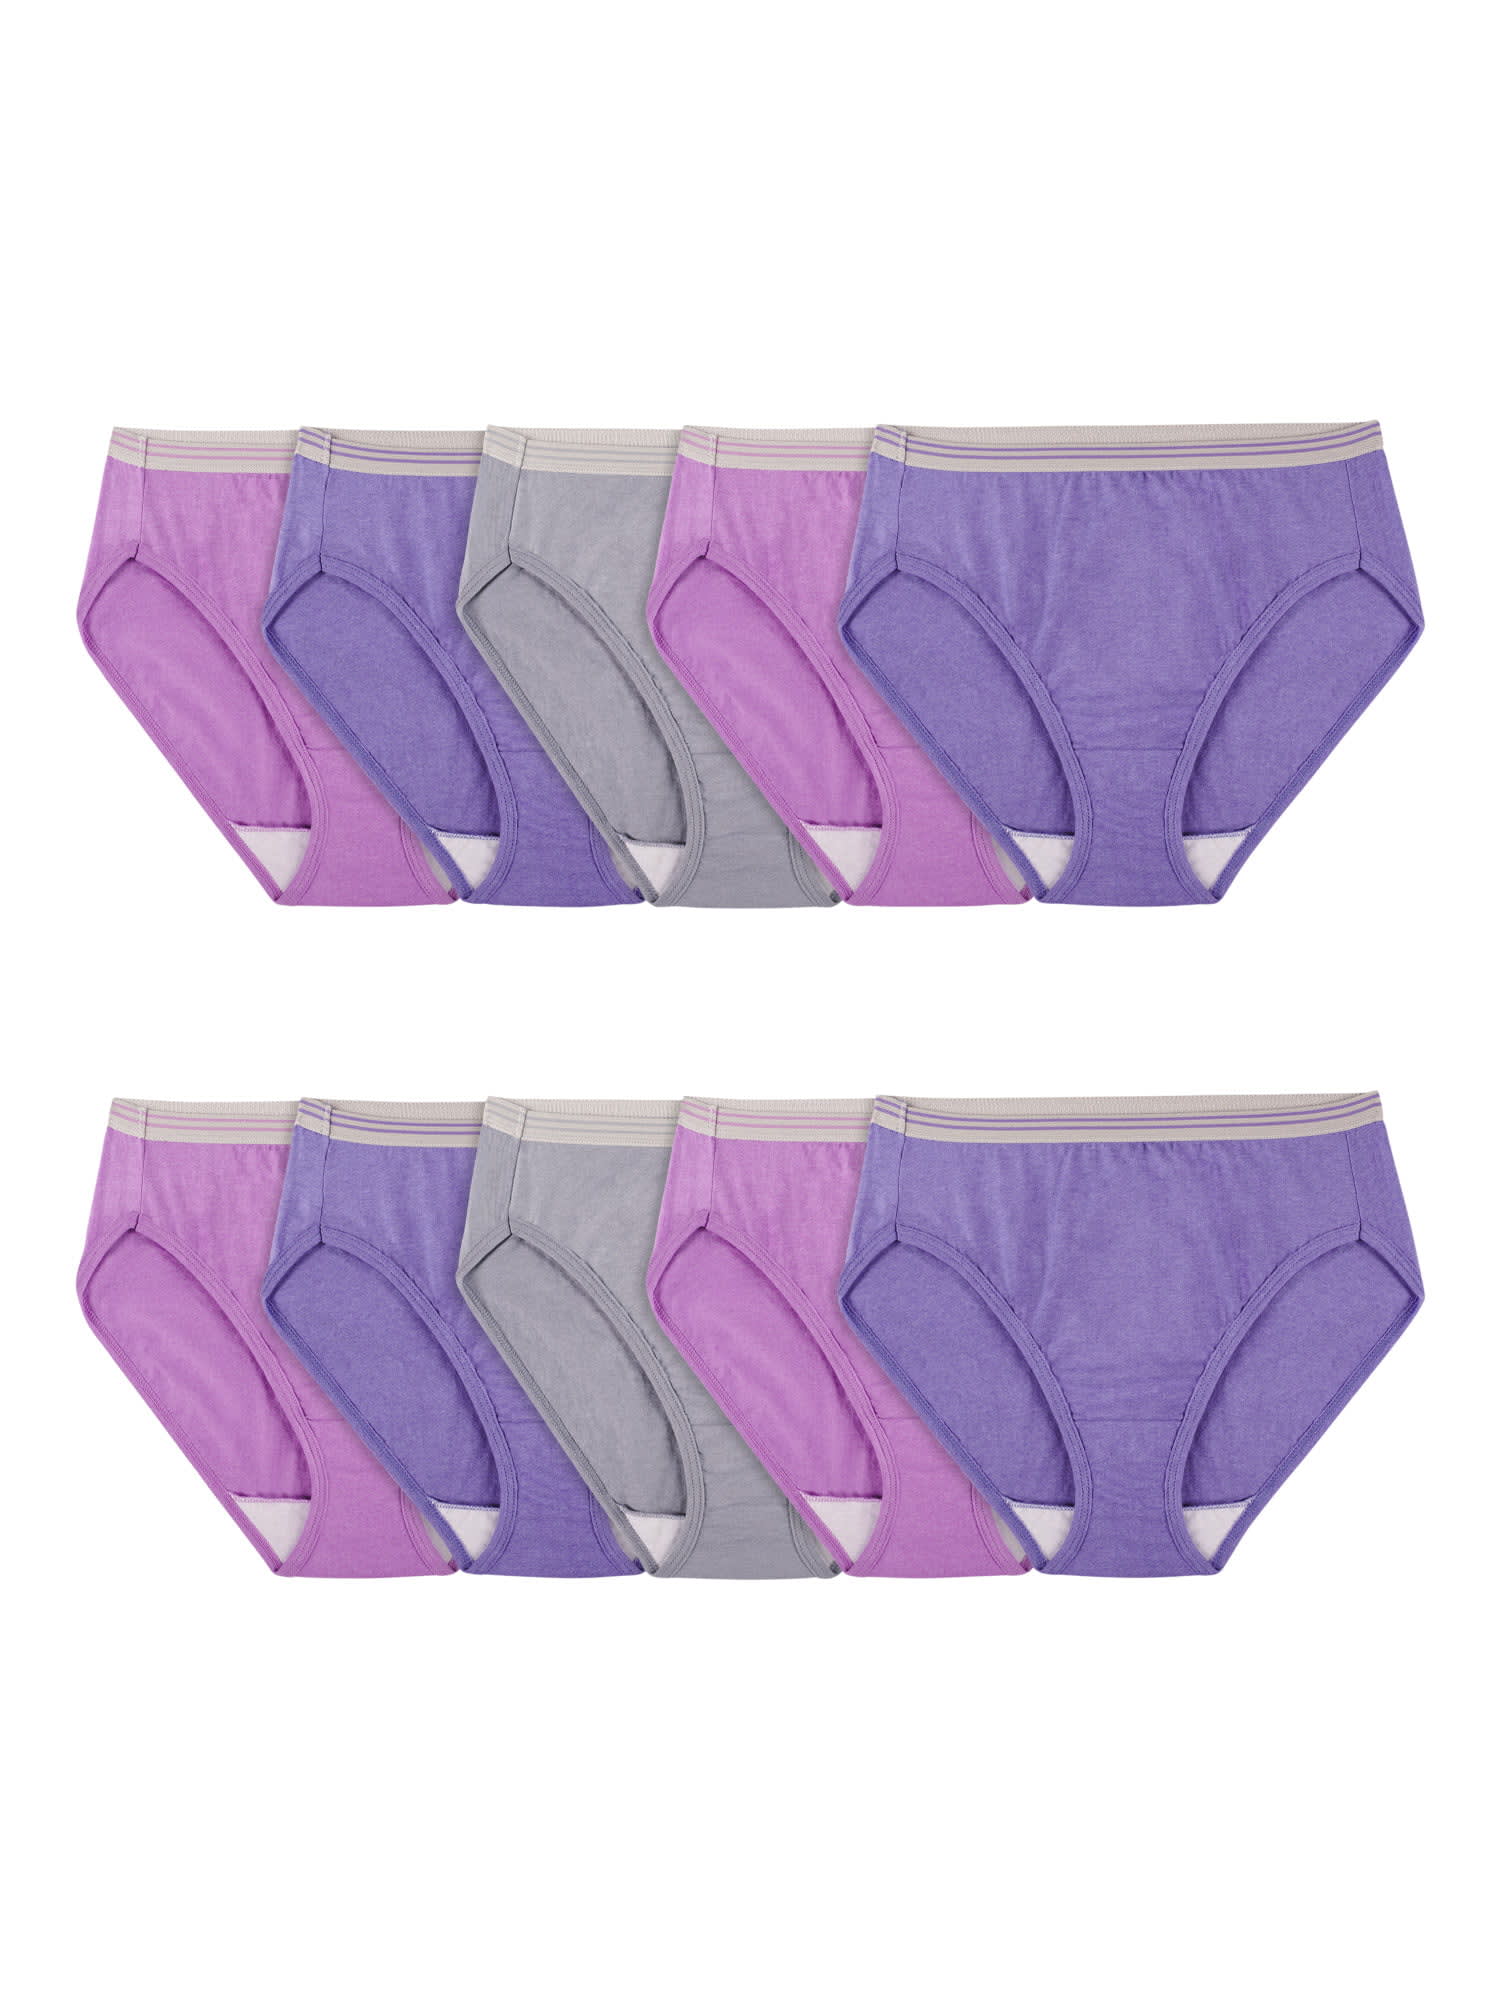 Fruit of the Loom Women's Assorted Cotton Brief Underwear, 6 Pack